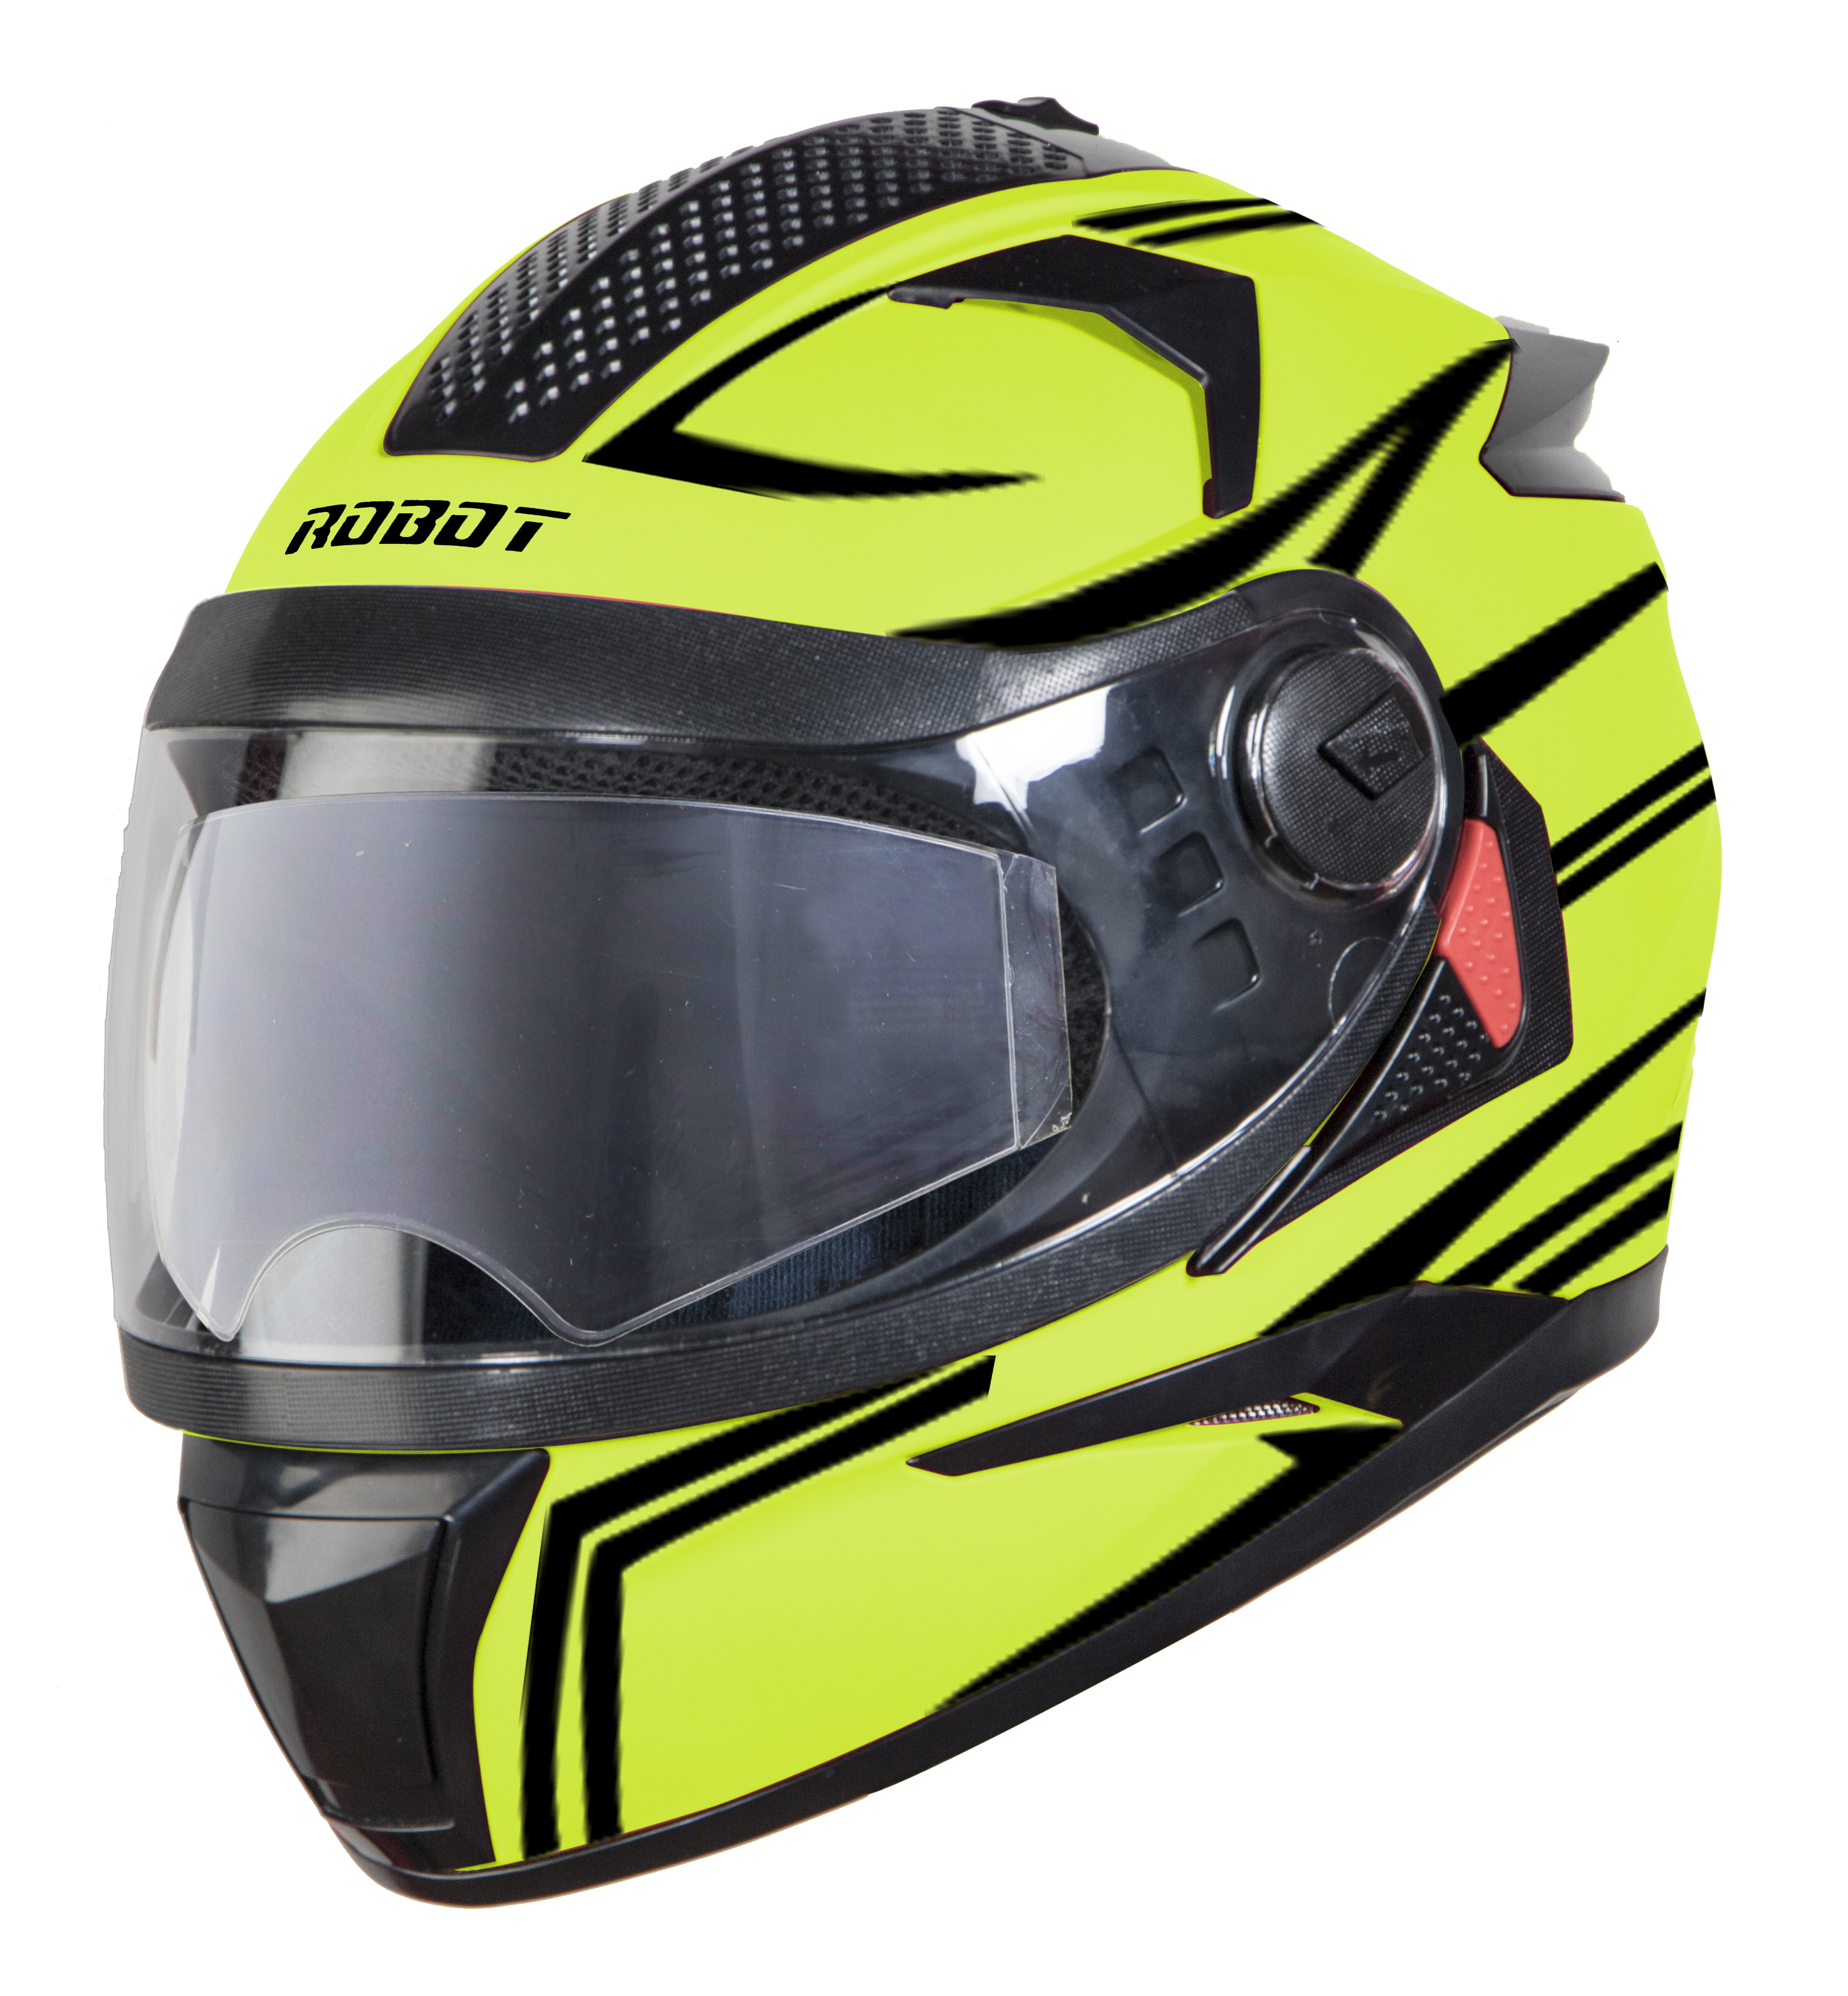 SBH-17 ROBOT REFLECTIVE GLOSSY FLUO NEON (WITH ANTI-FOG SHIELD)